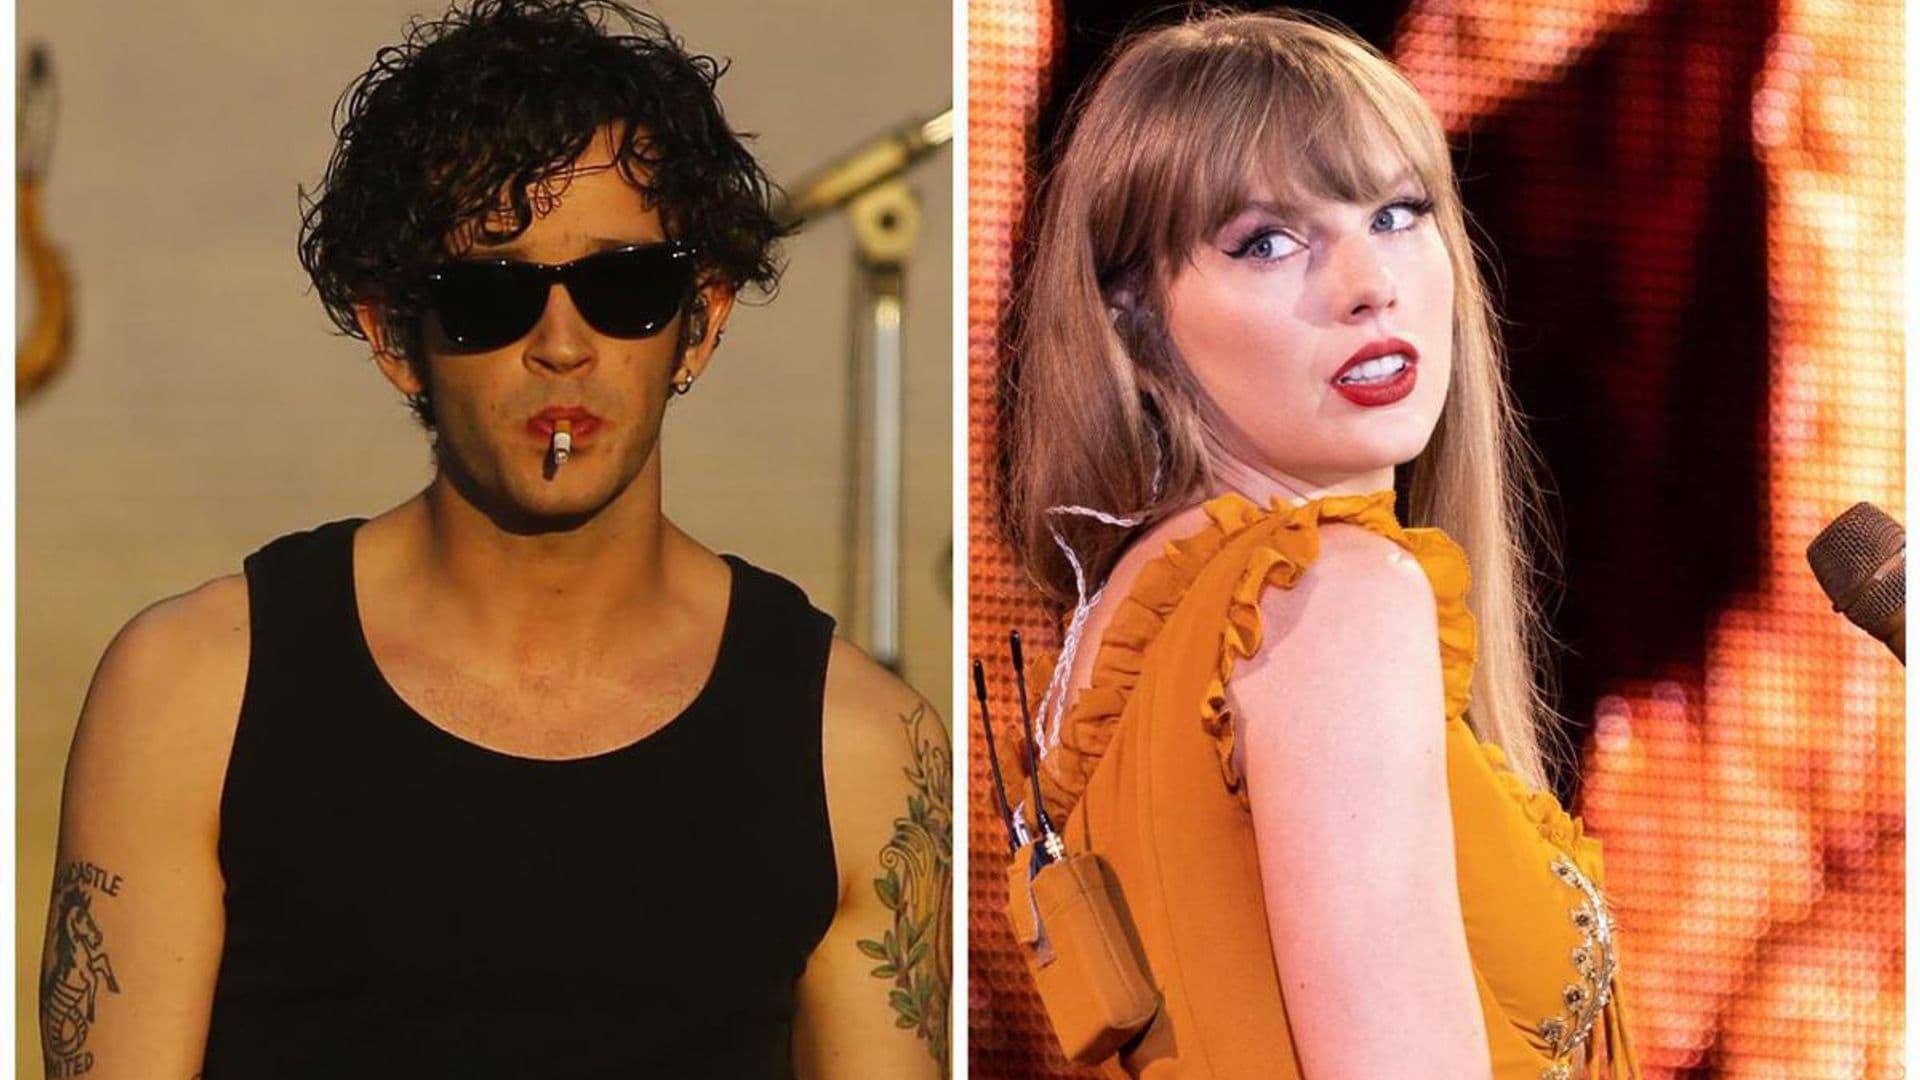 Taylor Swift’s new rumored boo is The 1975’s frontman Matty Healy